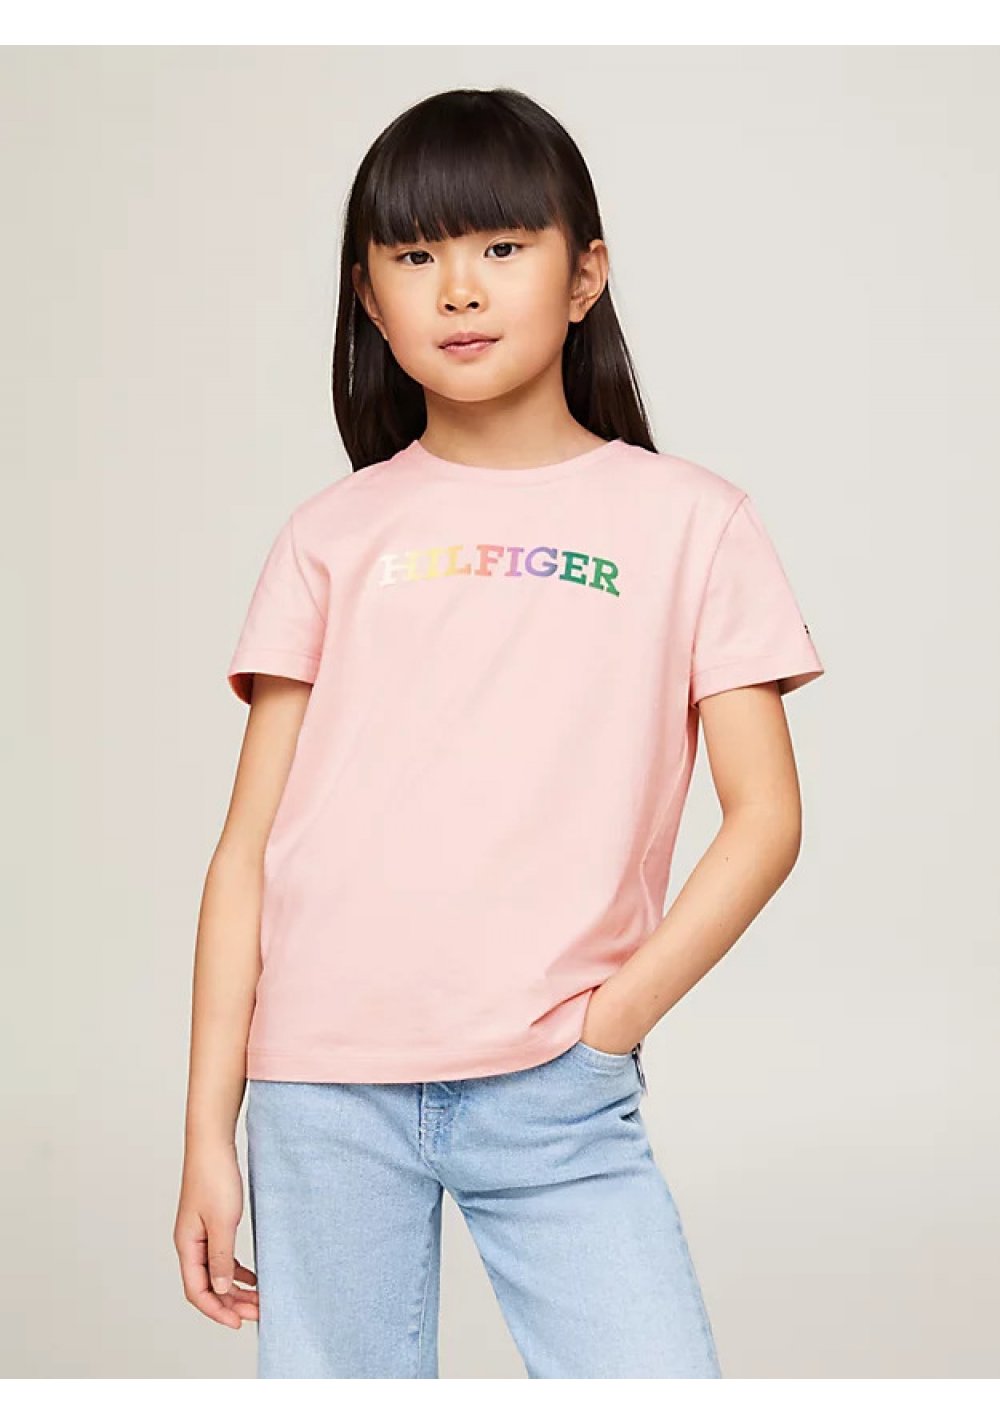 Tommy Hilfiger TEE LOGO COLORS - T-shirt rosa con stampa a rilievo